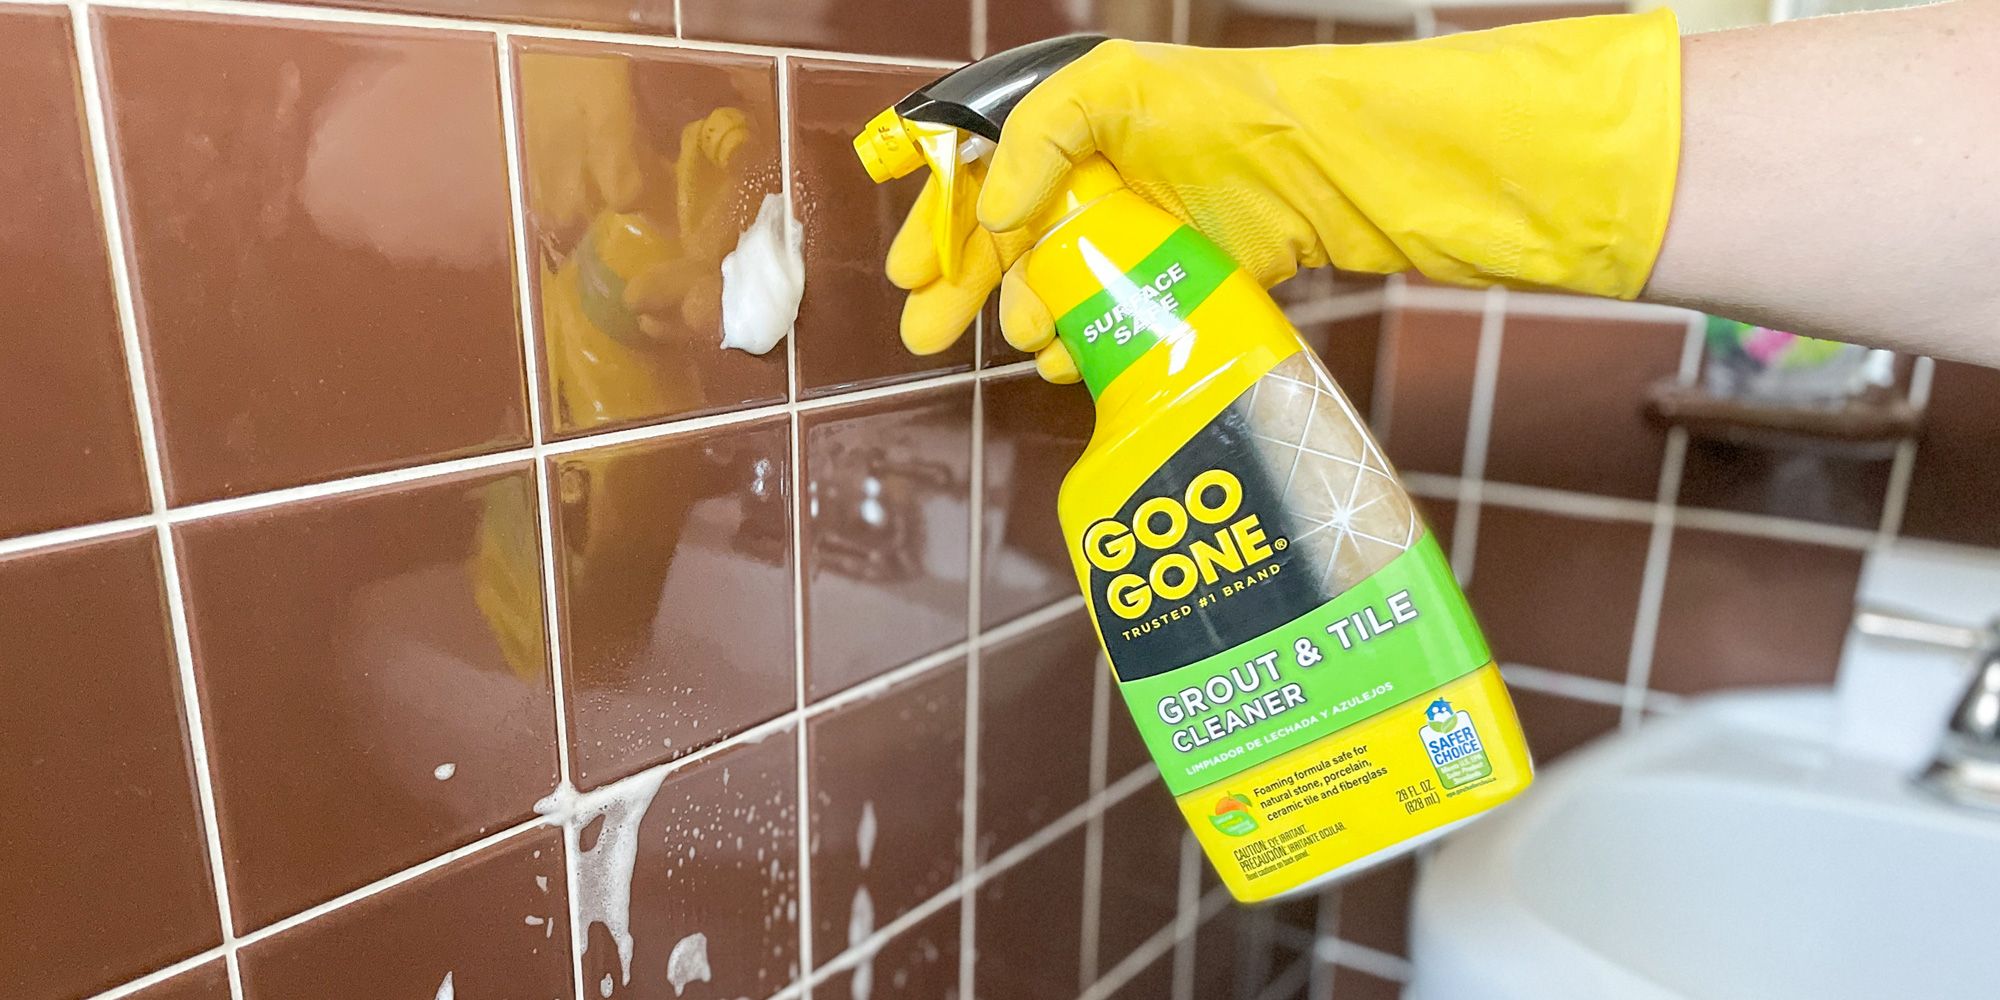 4 Homemade Grout Cleaners That Really Work